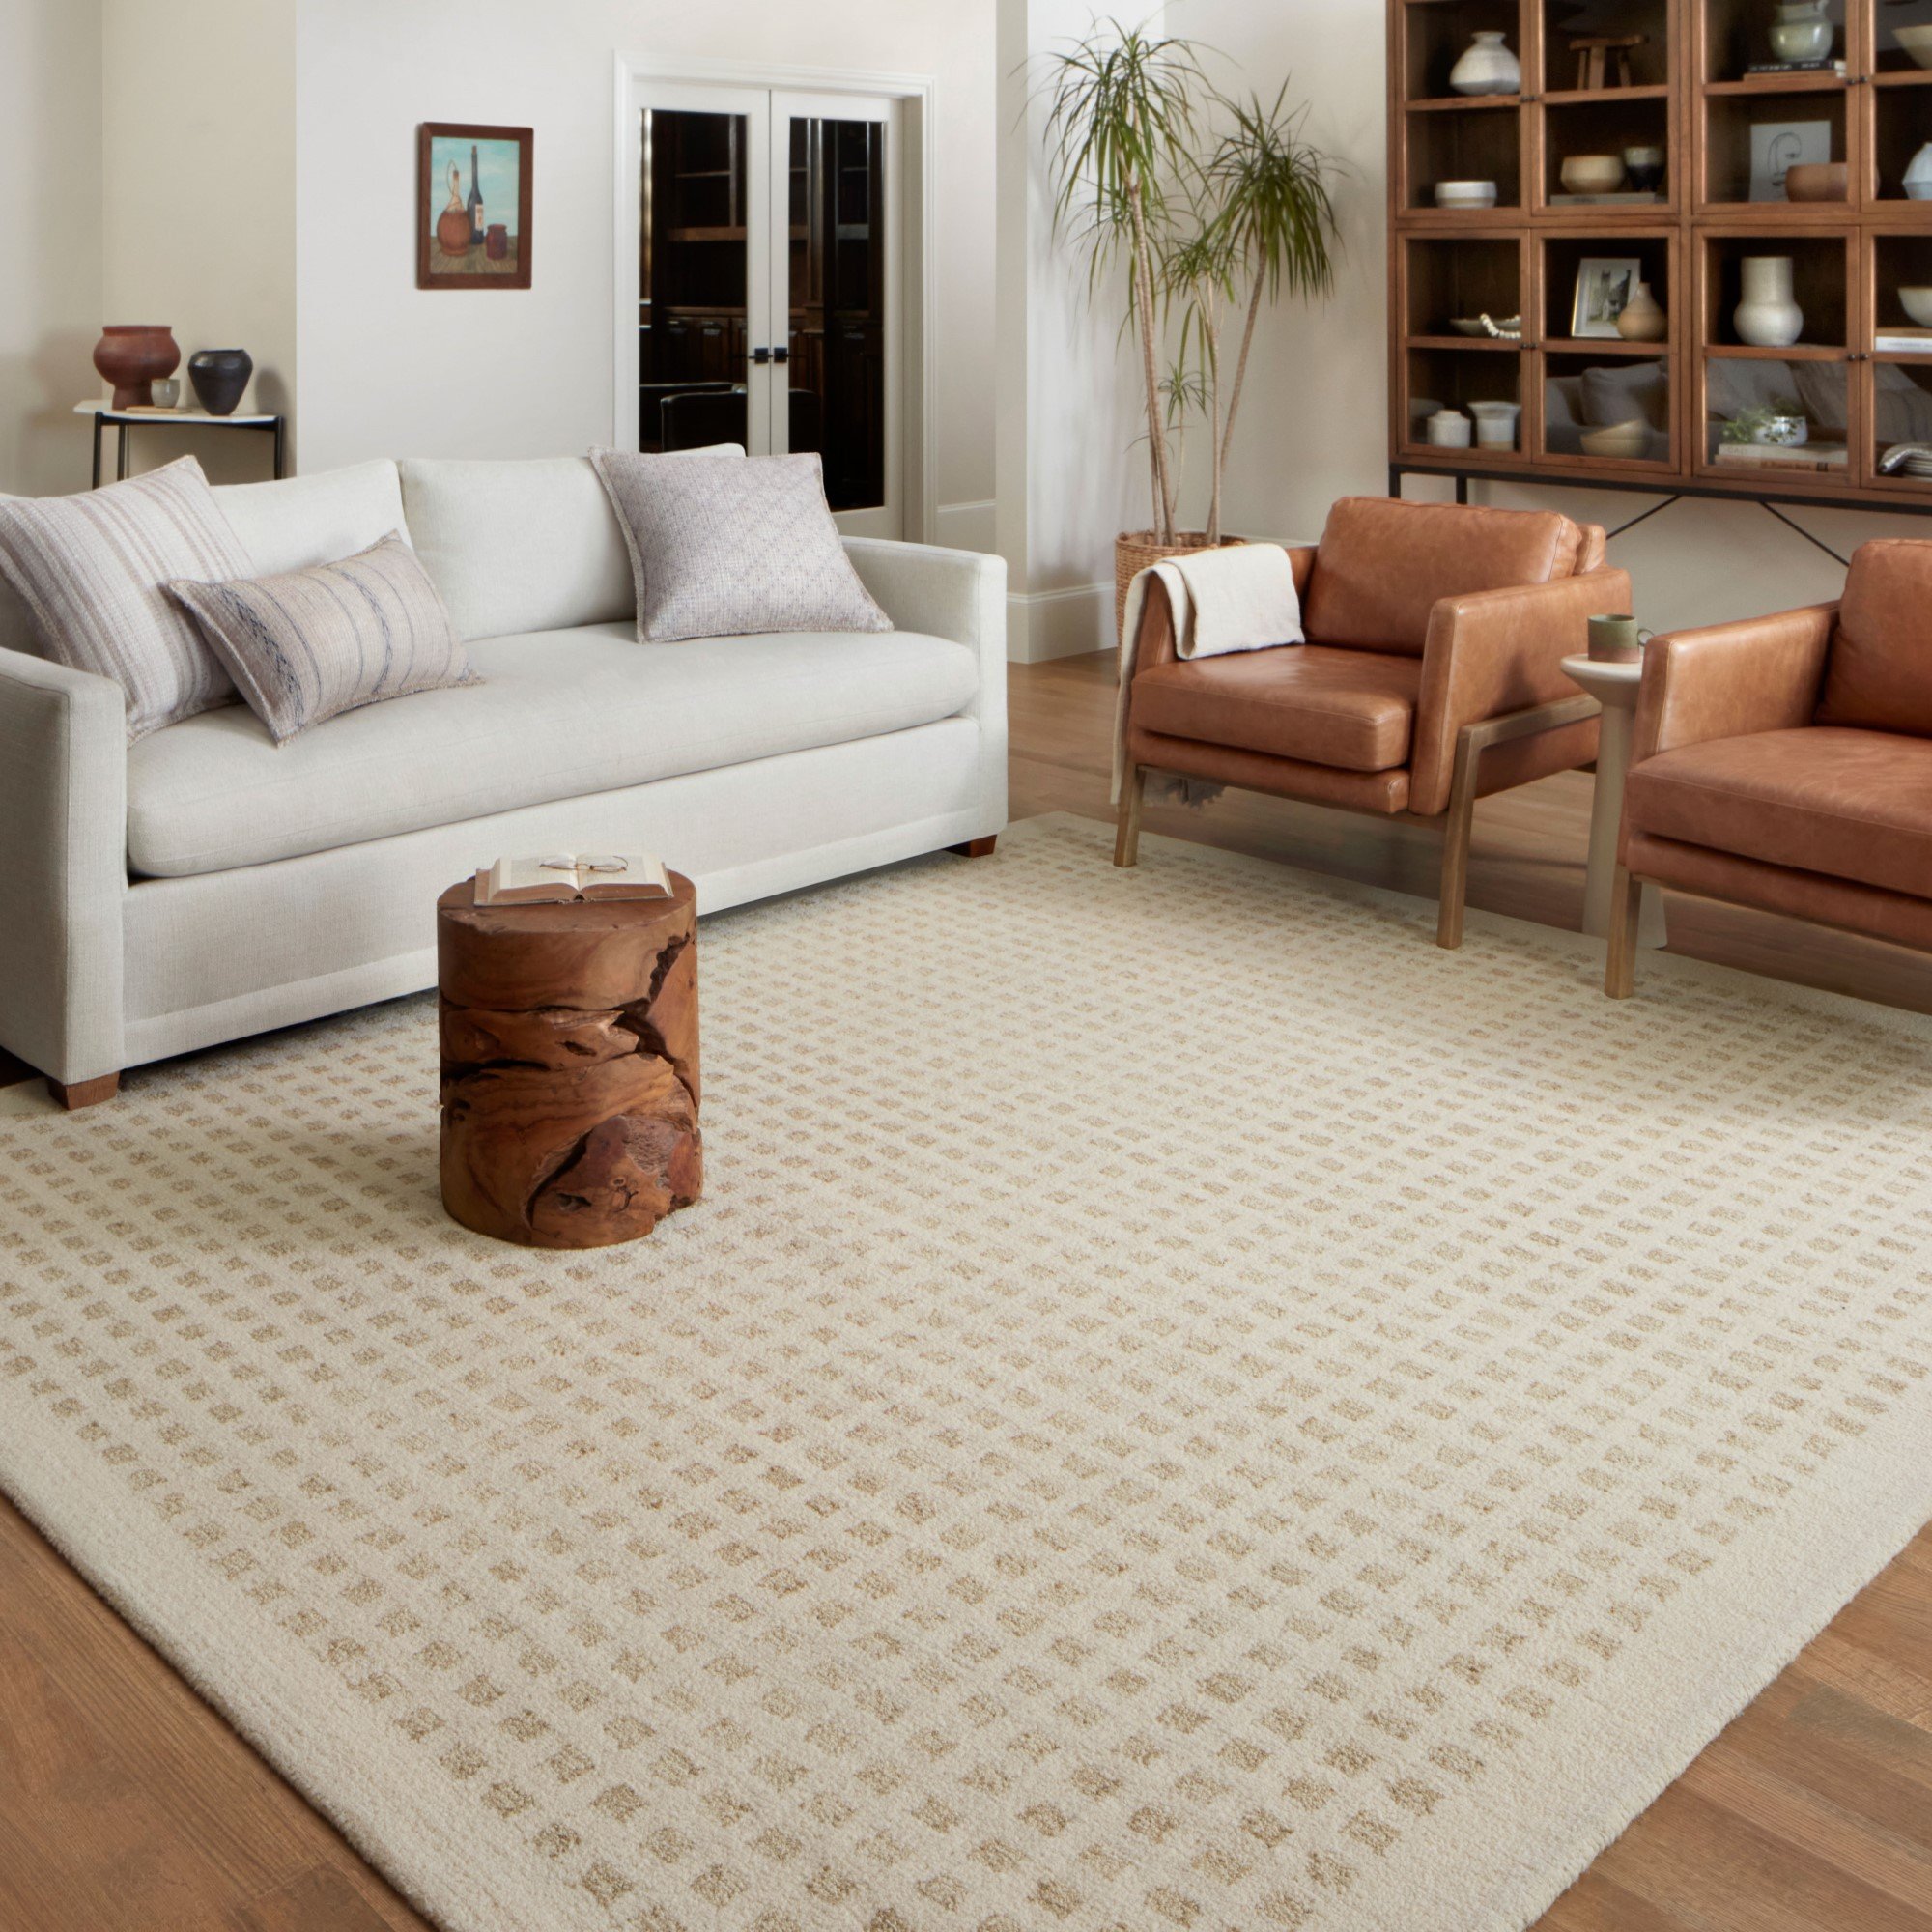 Abani Rugs Beige Arch Pattern Knot Modern Print Premium Area Rug -  Contemporary No-Shed Neutral 5'3” x 7'6” (5'x8') Bedroom Rug